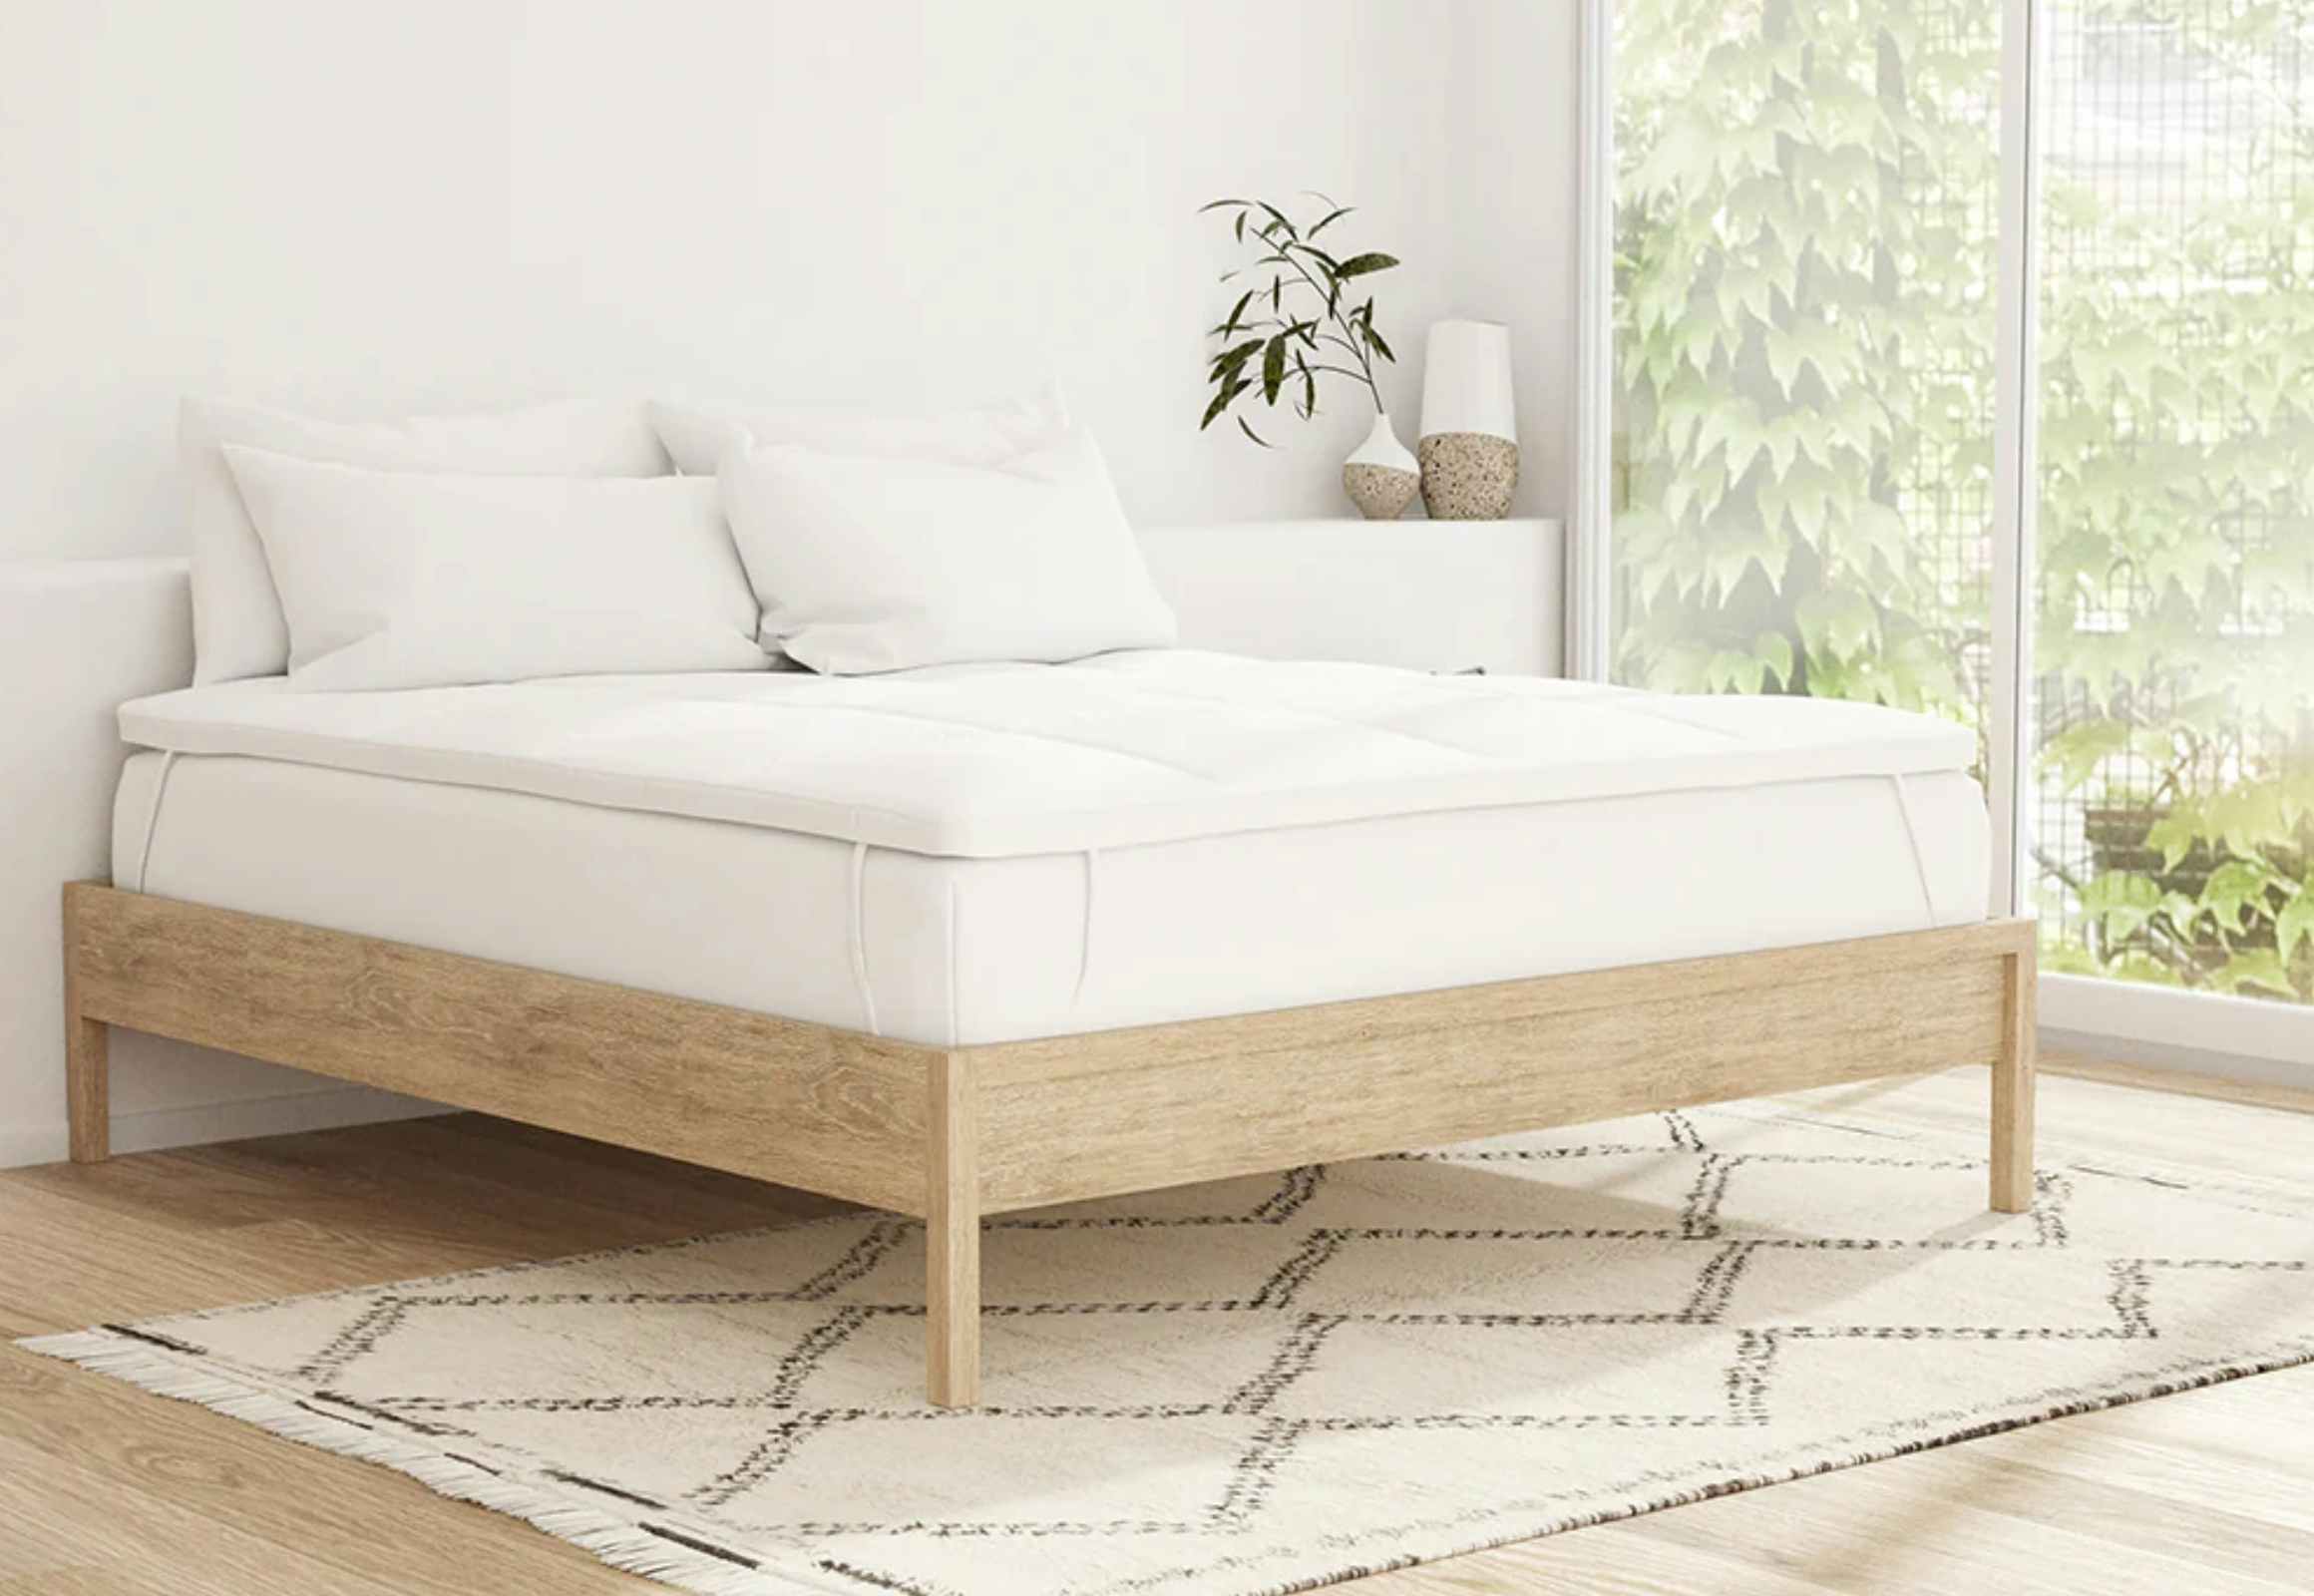 $42 Overfilled Plush Mattress Topper at Linens & Hutch (72% Off)